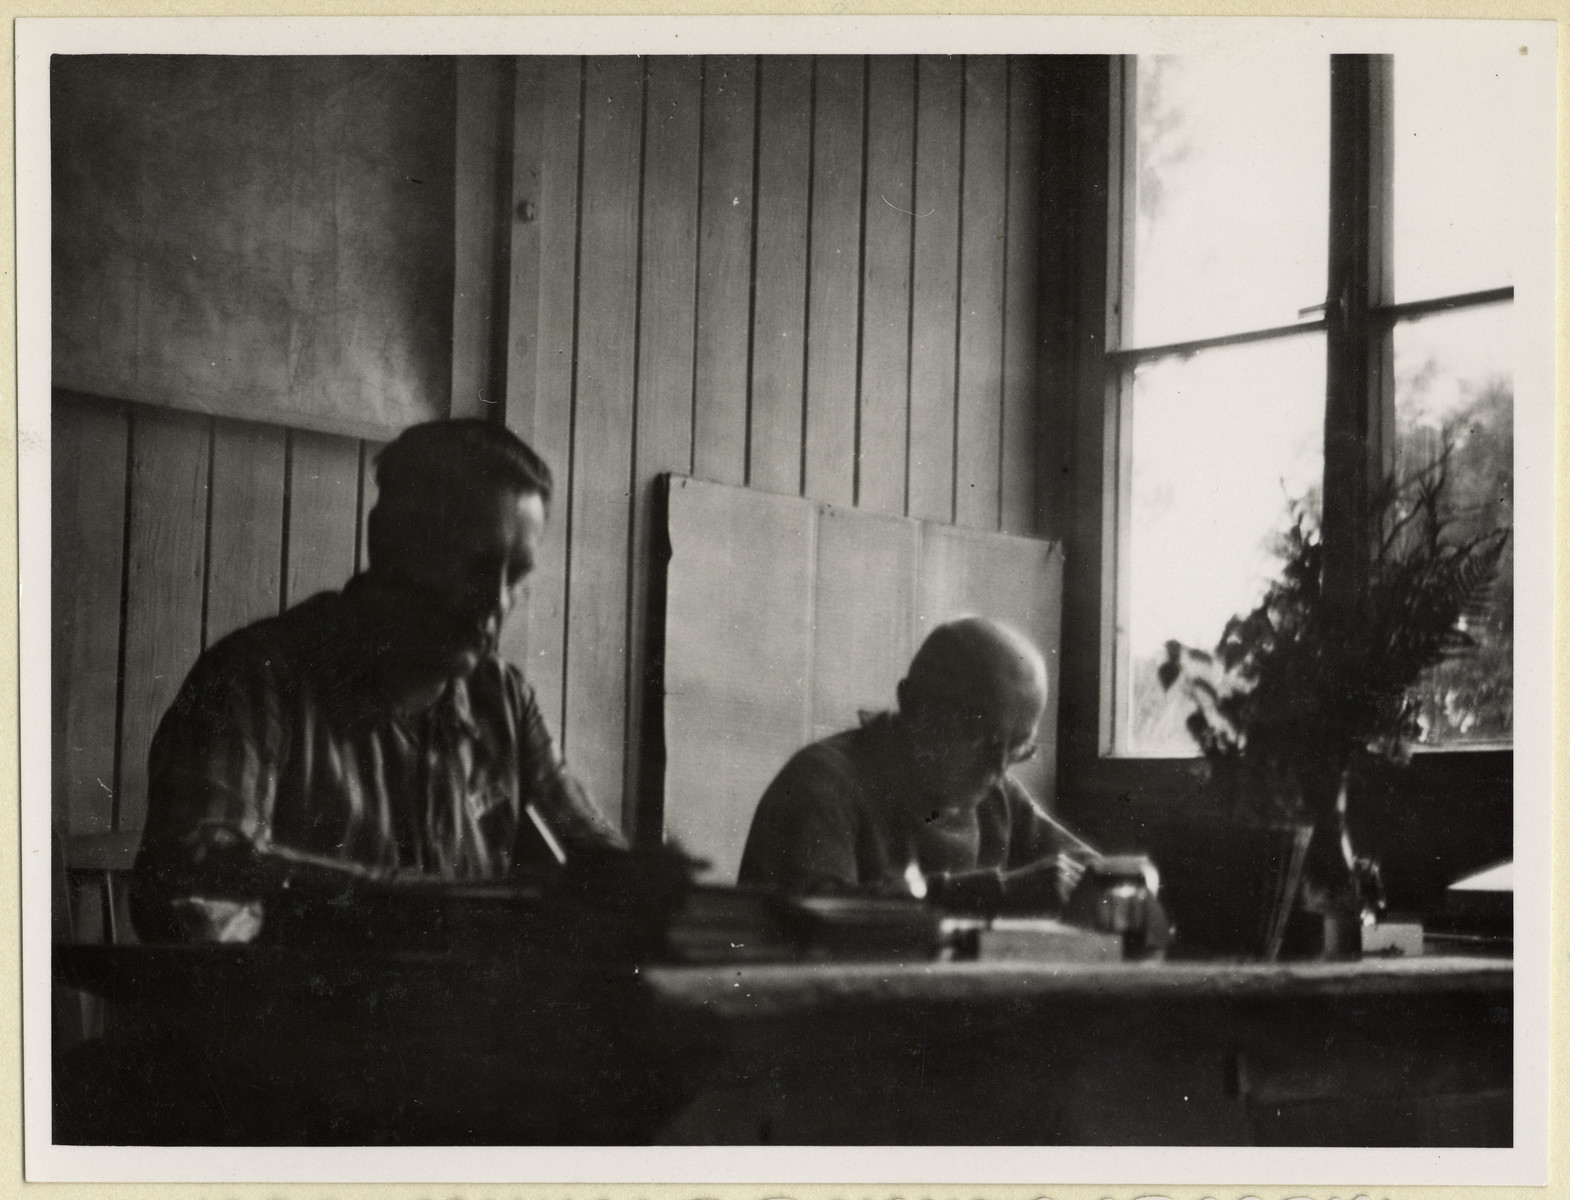 Czech political prisoners work in an office in the Dachau concentration camp.

Seated on the right is the priest, Dr. Frantisek Nemec.

The photograph was taken by Karel Kasak and developed by Maria Seidenberger.